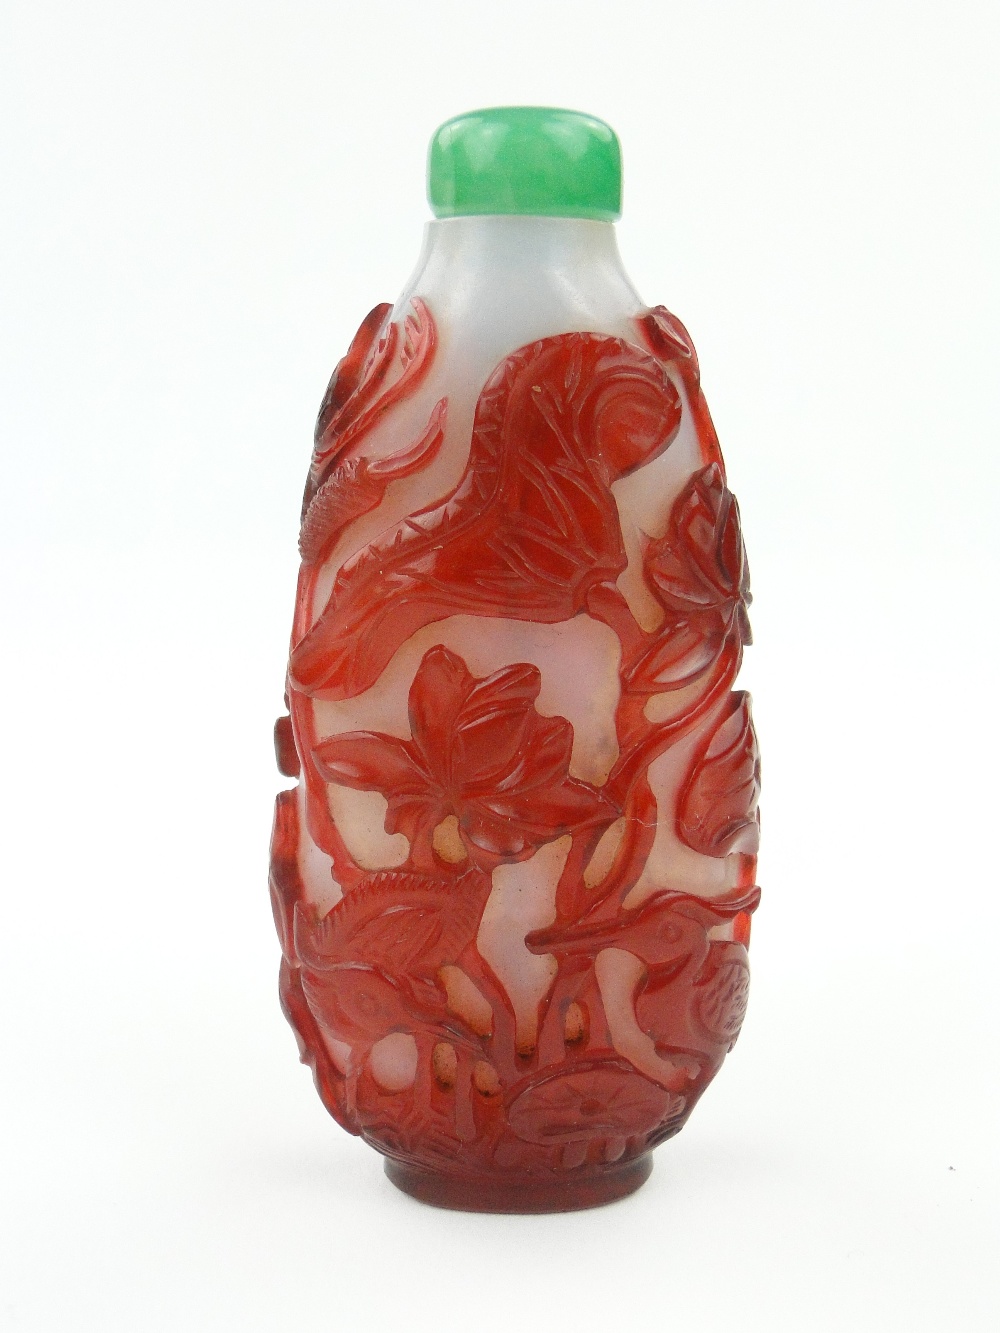 Antique Chinese Peking red overlay glass snuff bottle with design of birds amongst flowers, with